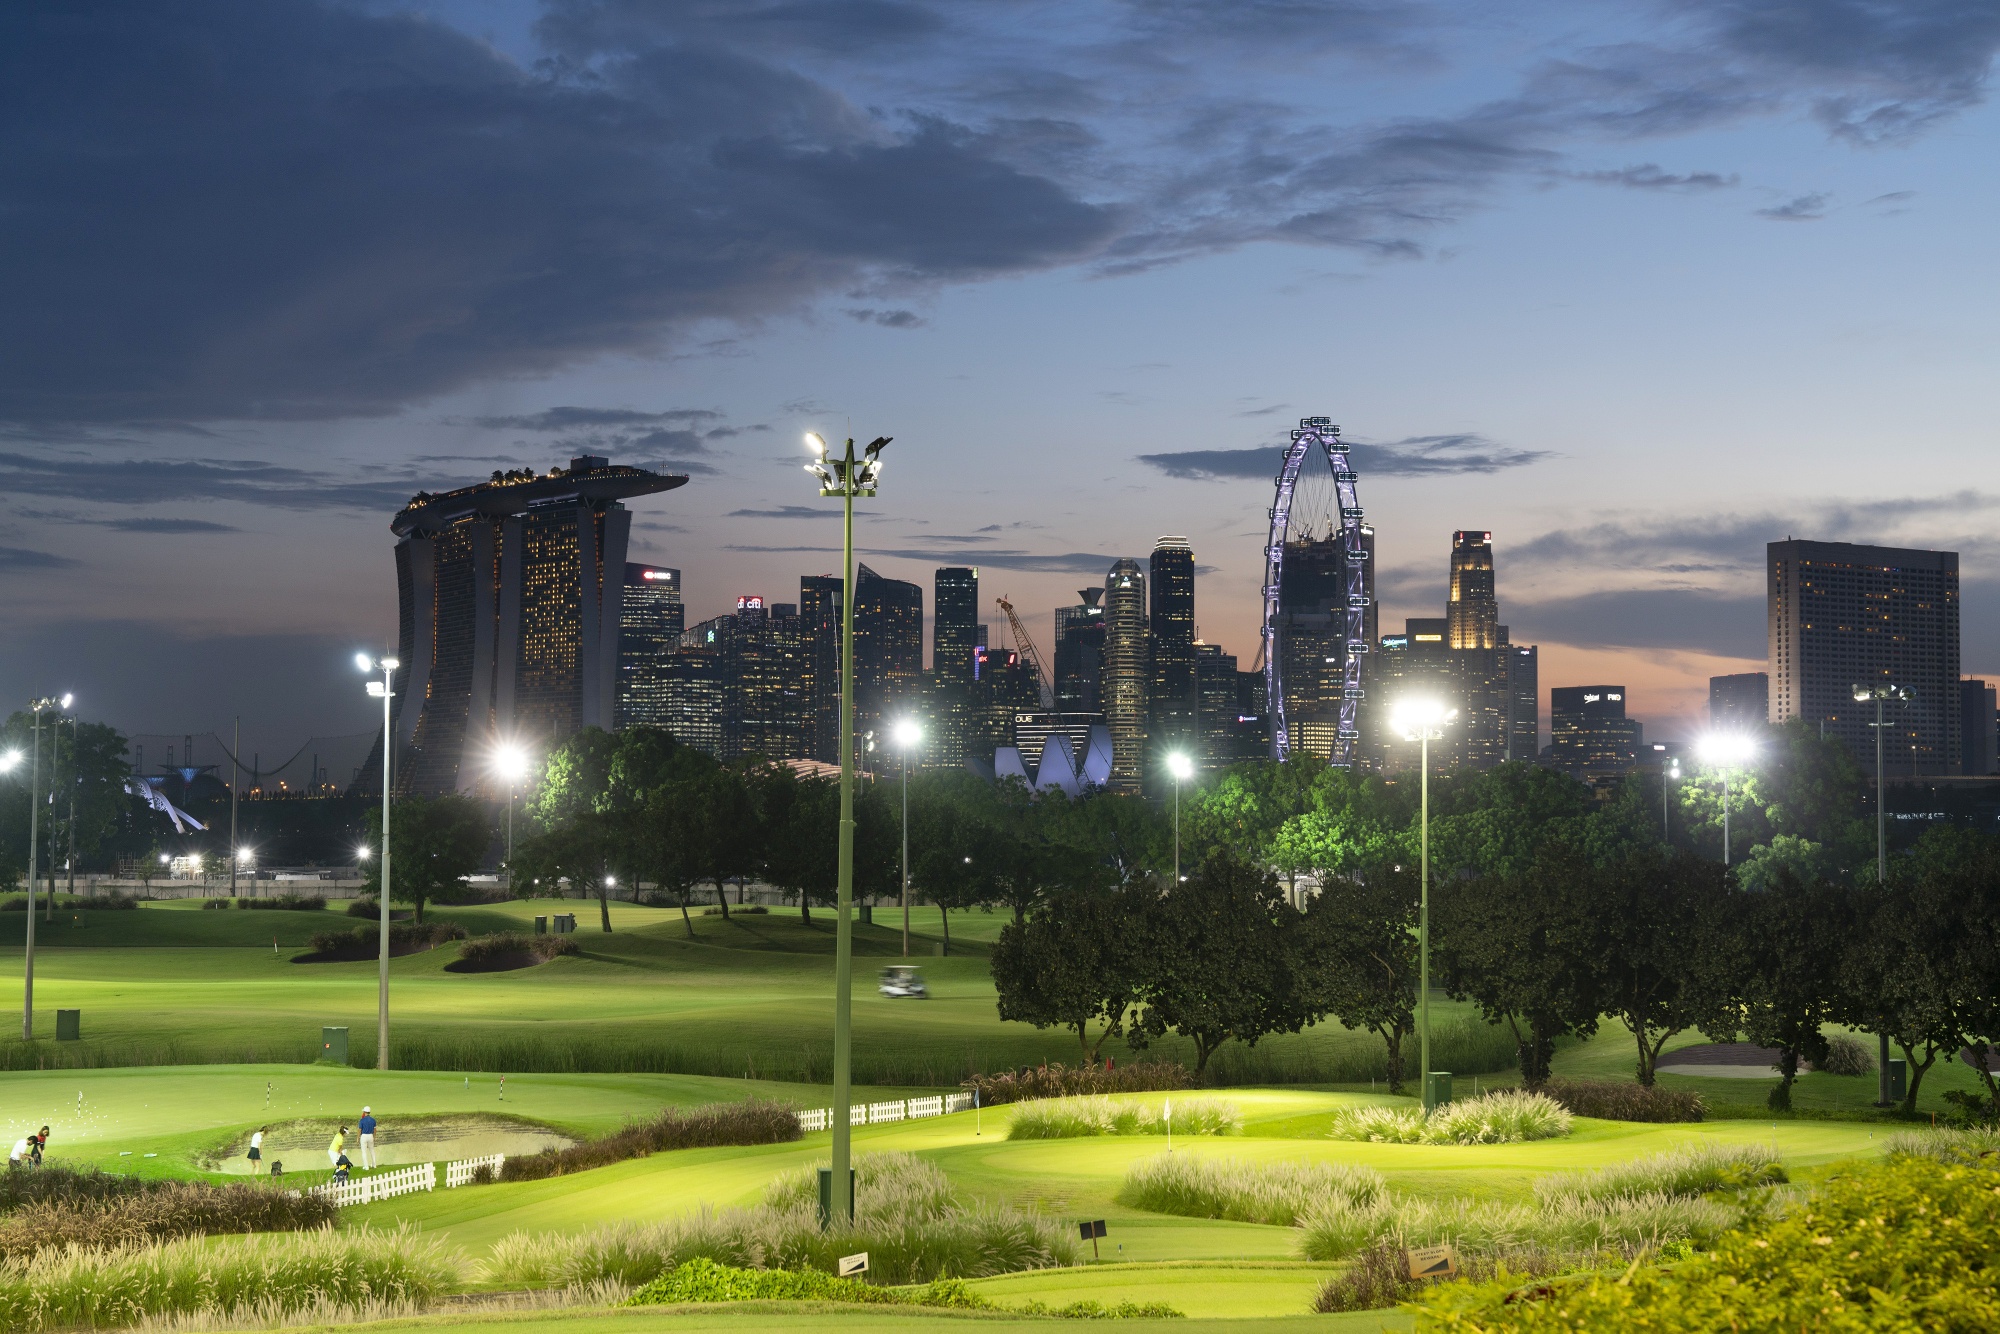 Golfers play evening rounds at the Marina Bay Golf Course in Singapore on April 6.